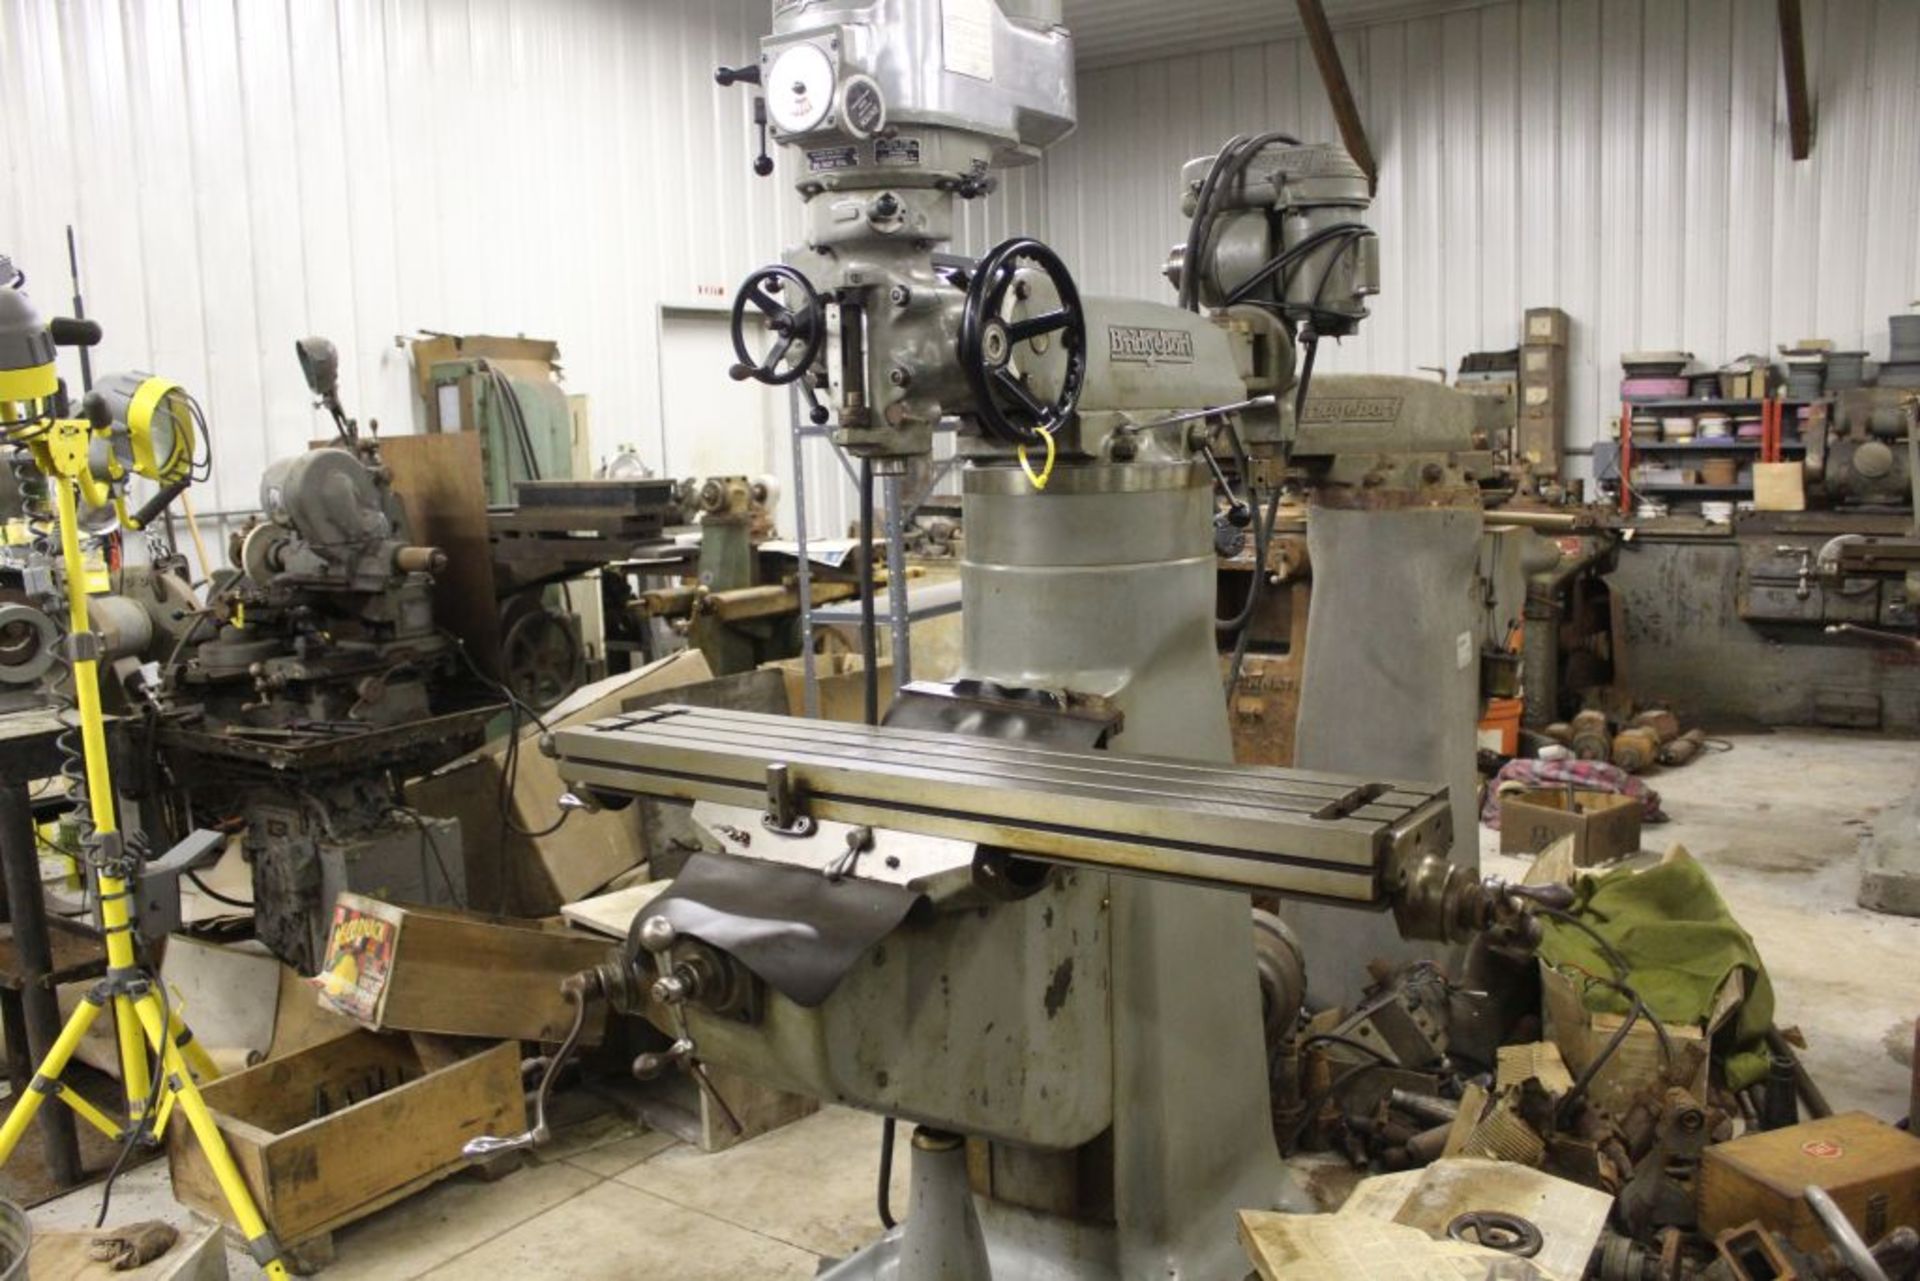 Bridgeport mill, model 12-BR, sn 83978, 9" x 48" bed, manual (not down power), shaping attachment.